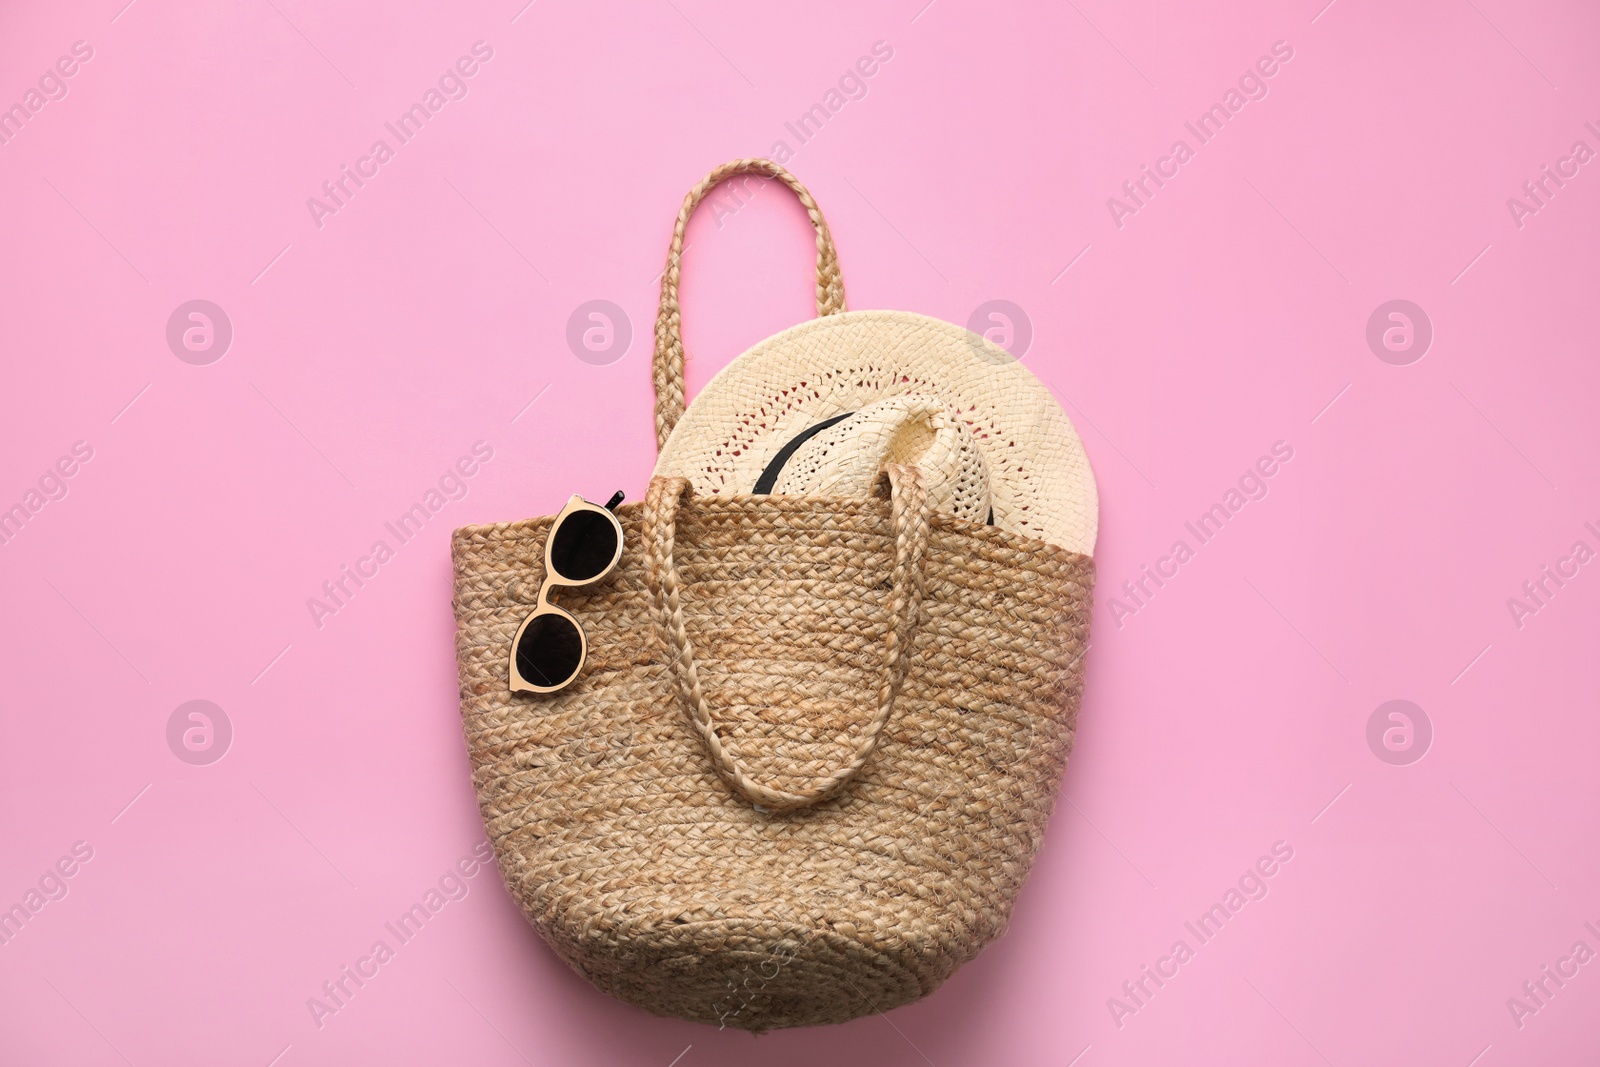 Photo of Elegant woman's straw bag with hat and sunglasses on pink background, top view